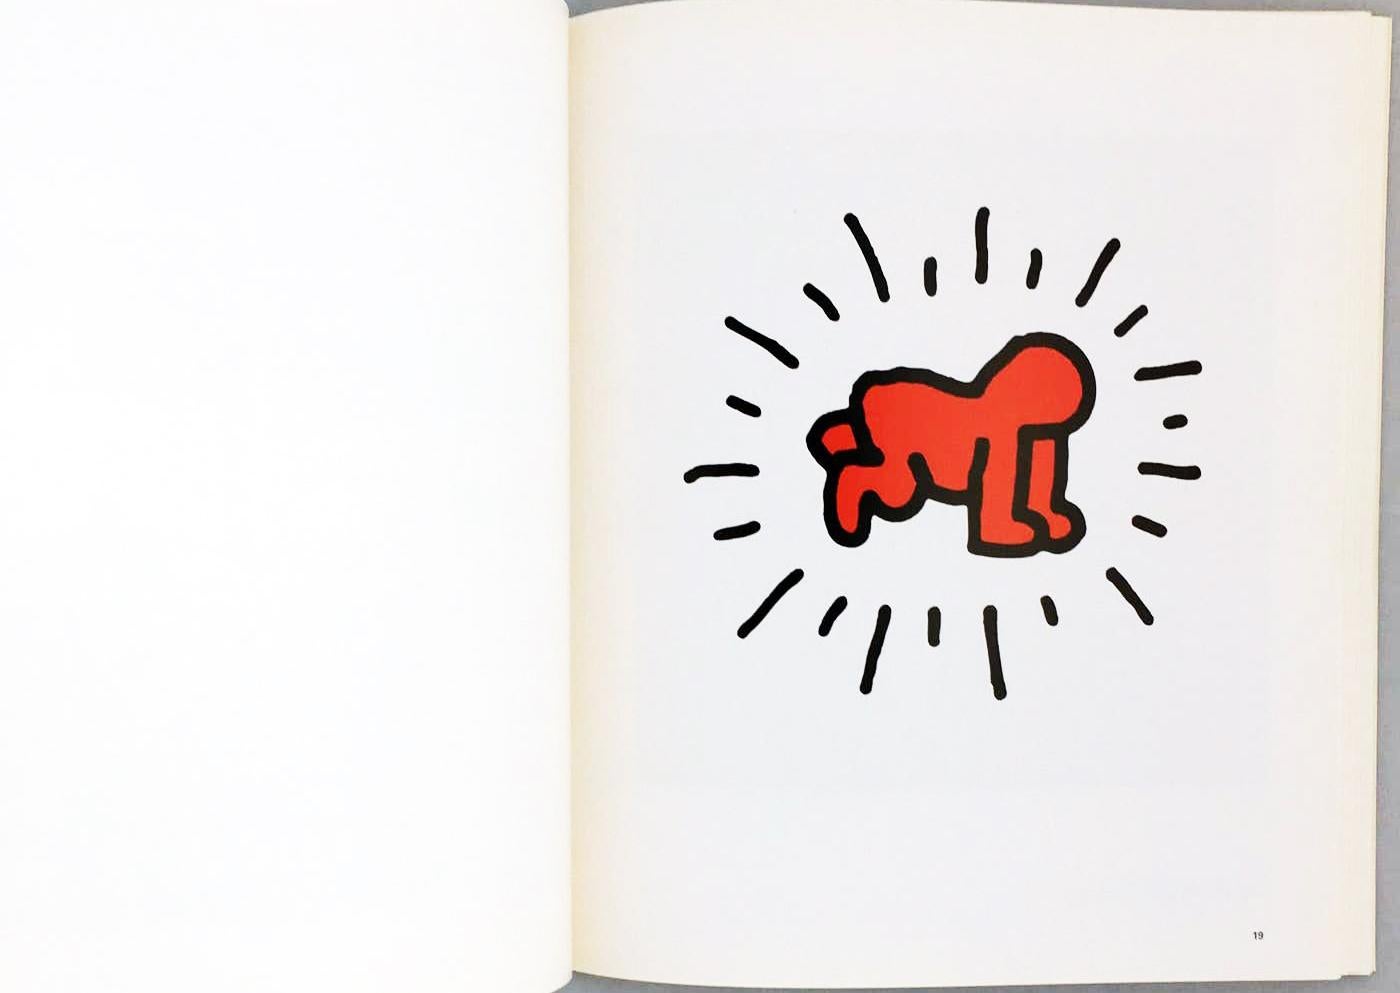 Kenny Scharf book drawing 1998 (Basquiat Keith Haring Kenny Scharf Lio Malca) For Sale 2